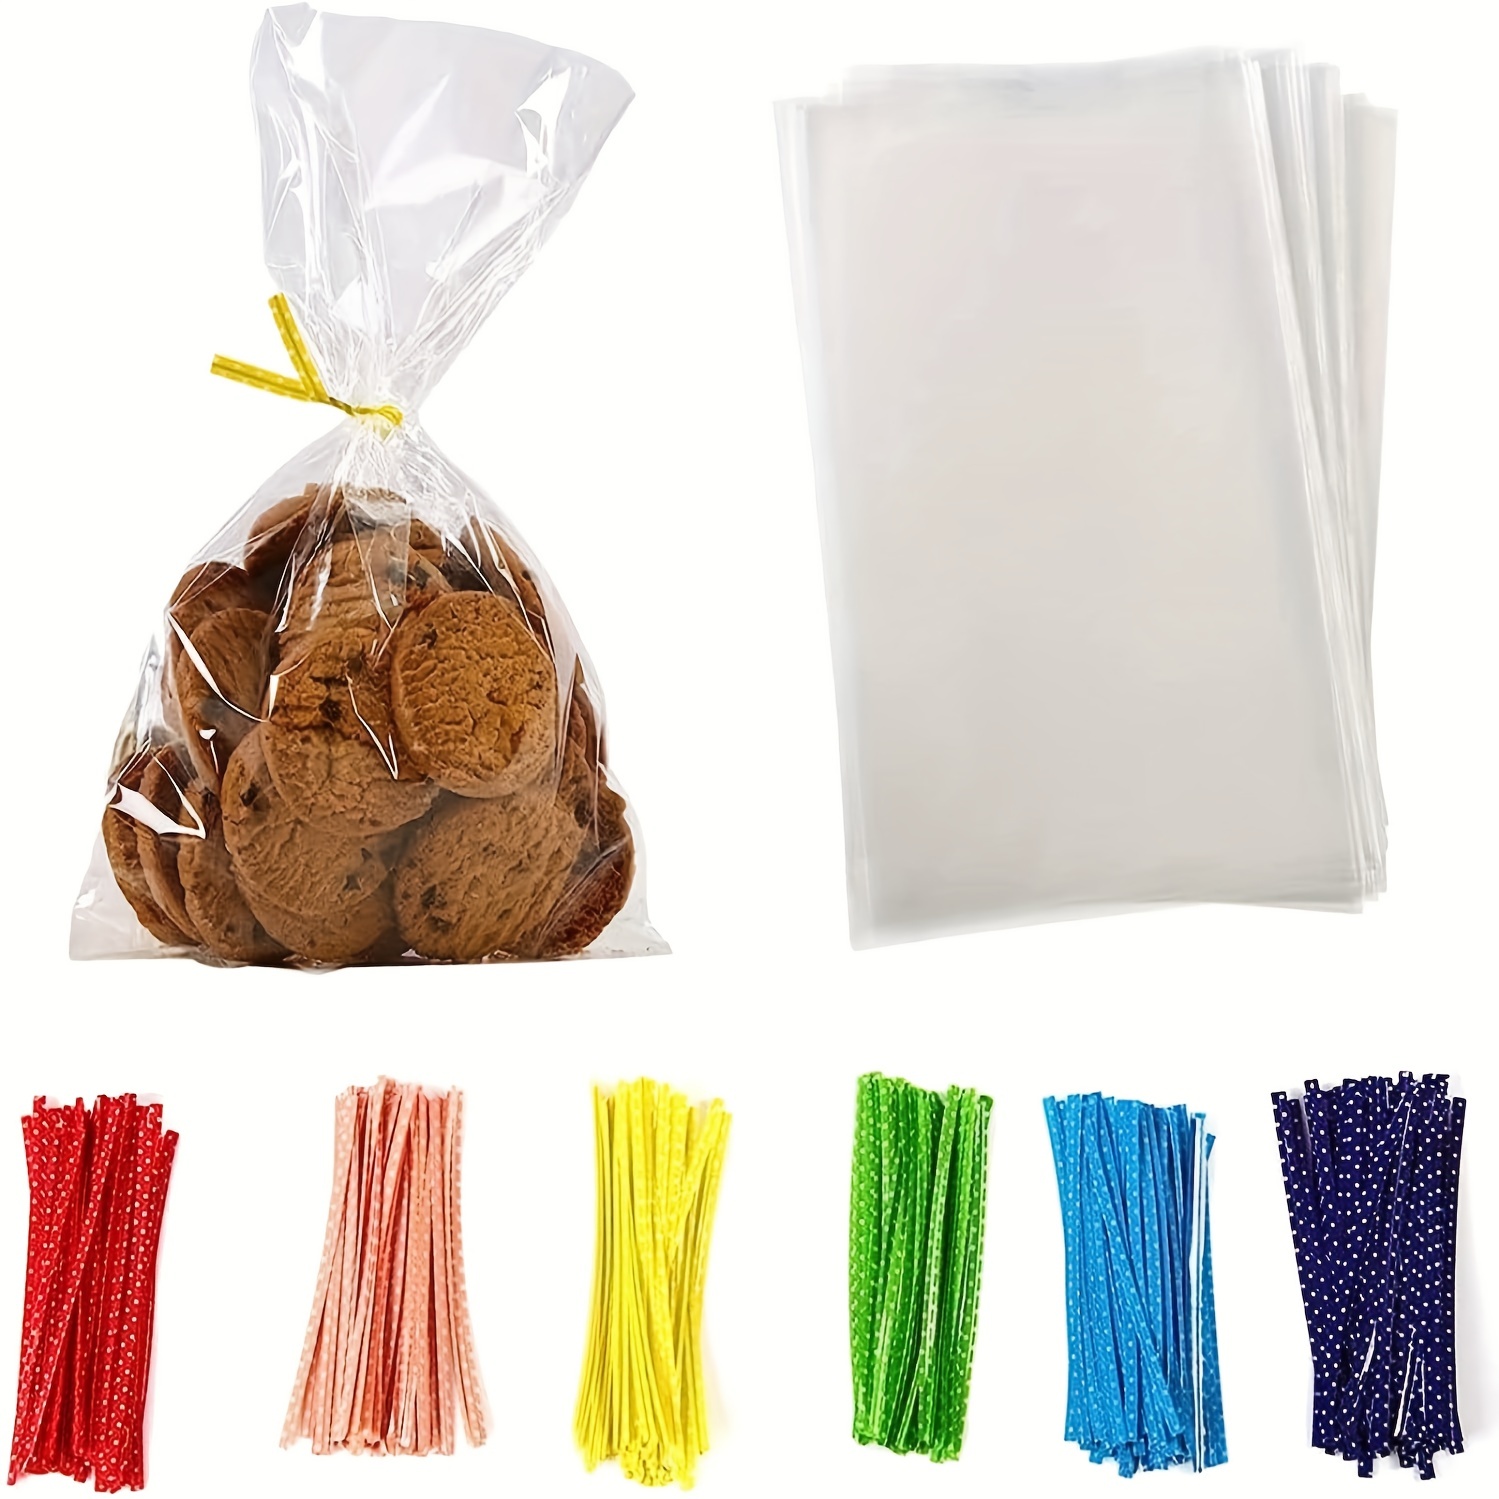 200 pcs Clear 5 x 11 Flat Cello Cellophane Bags Poly Treat Bags 2.8 mils  for Gift Wrapping, Bakery, Cookie, Candies, Toast, Dessert, Party Favors